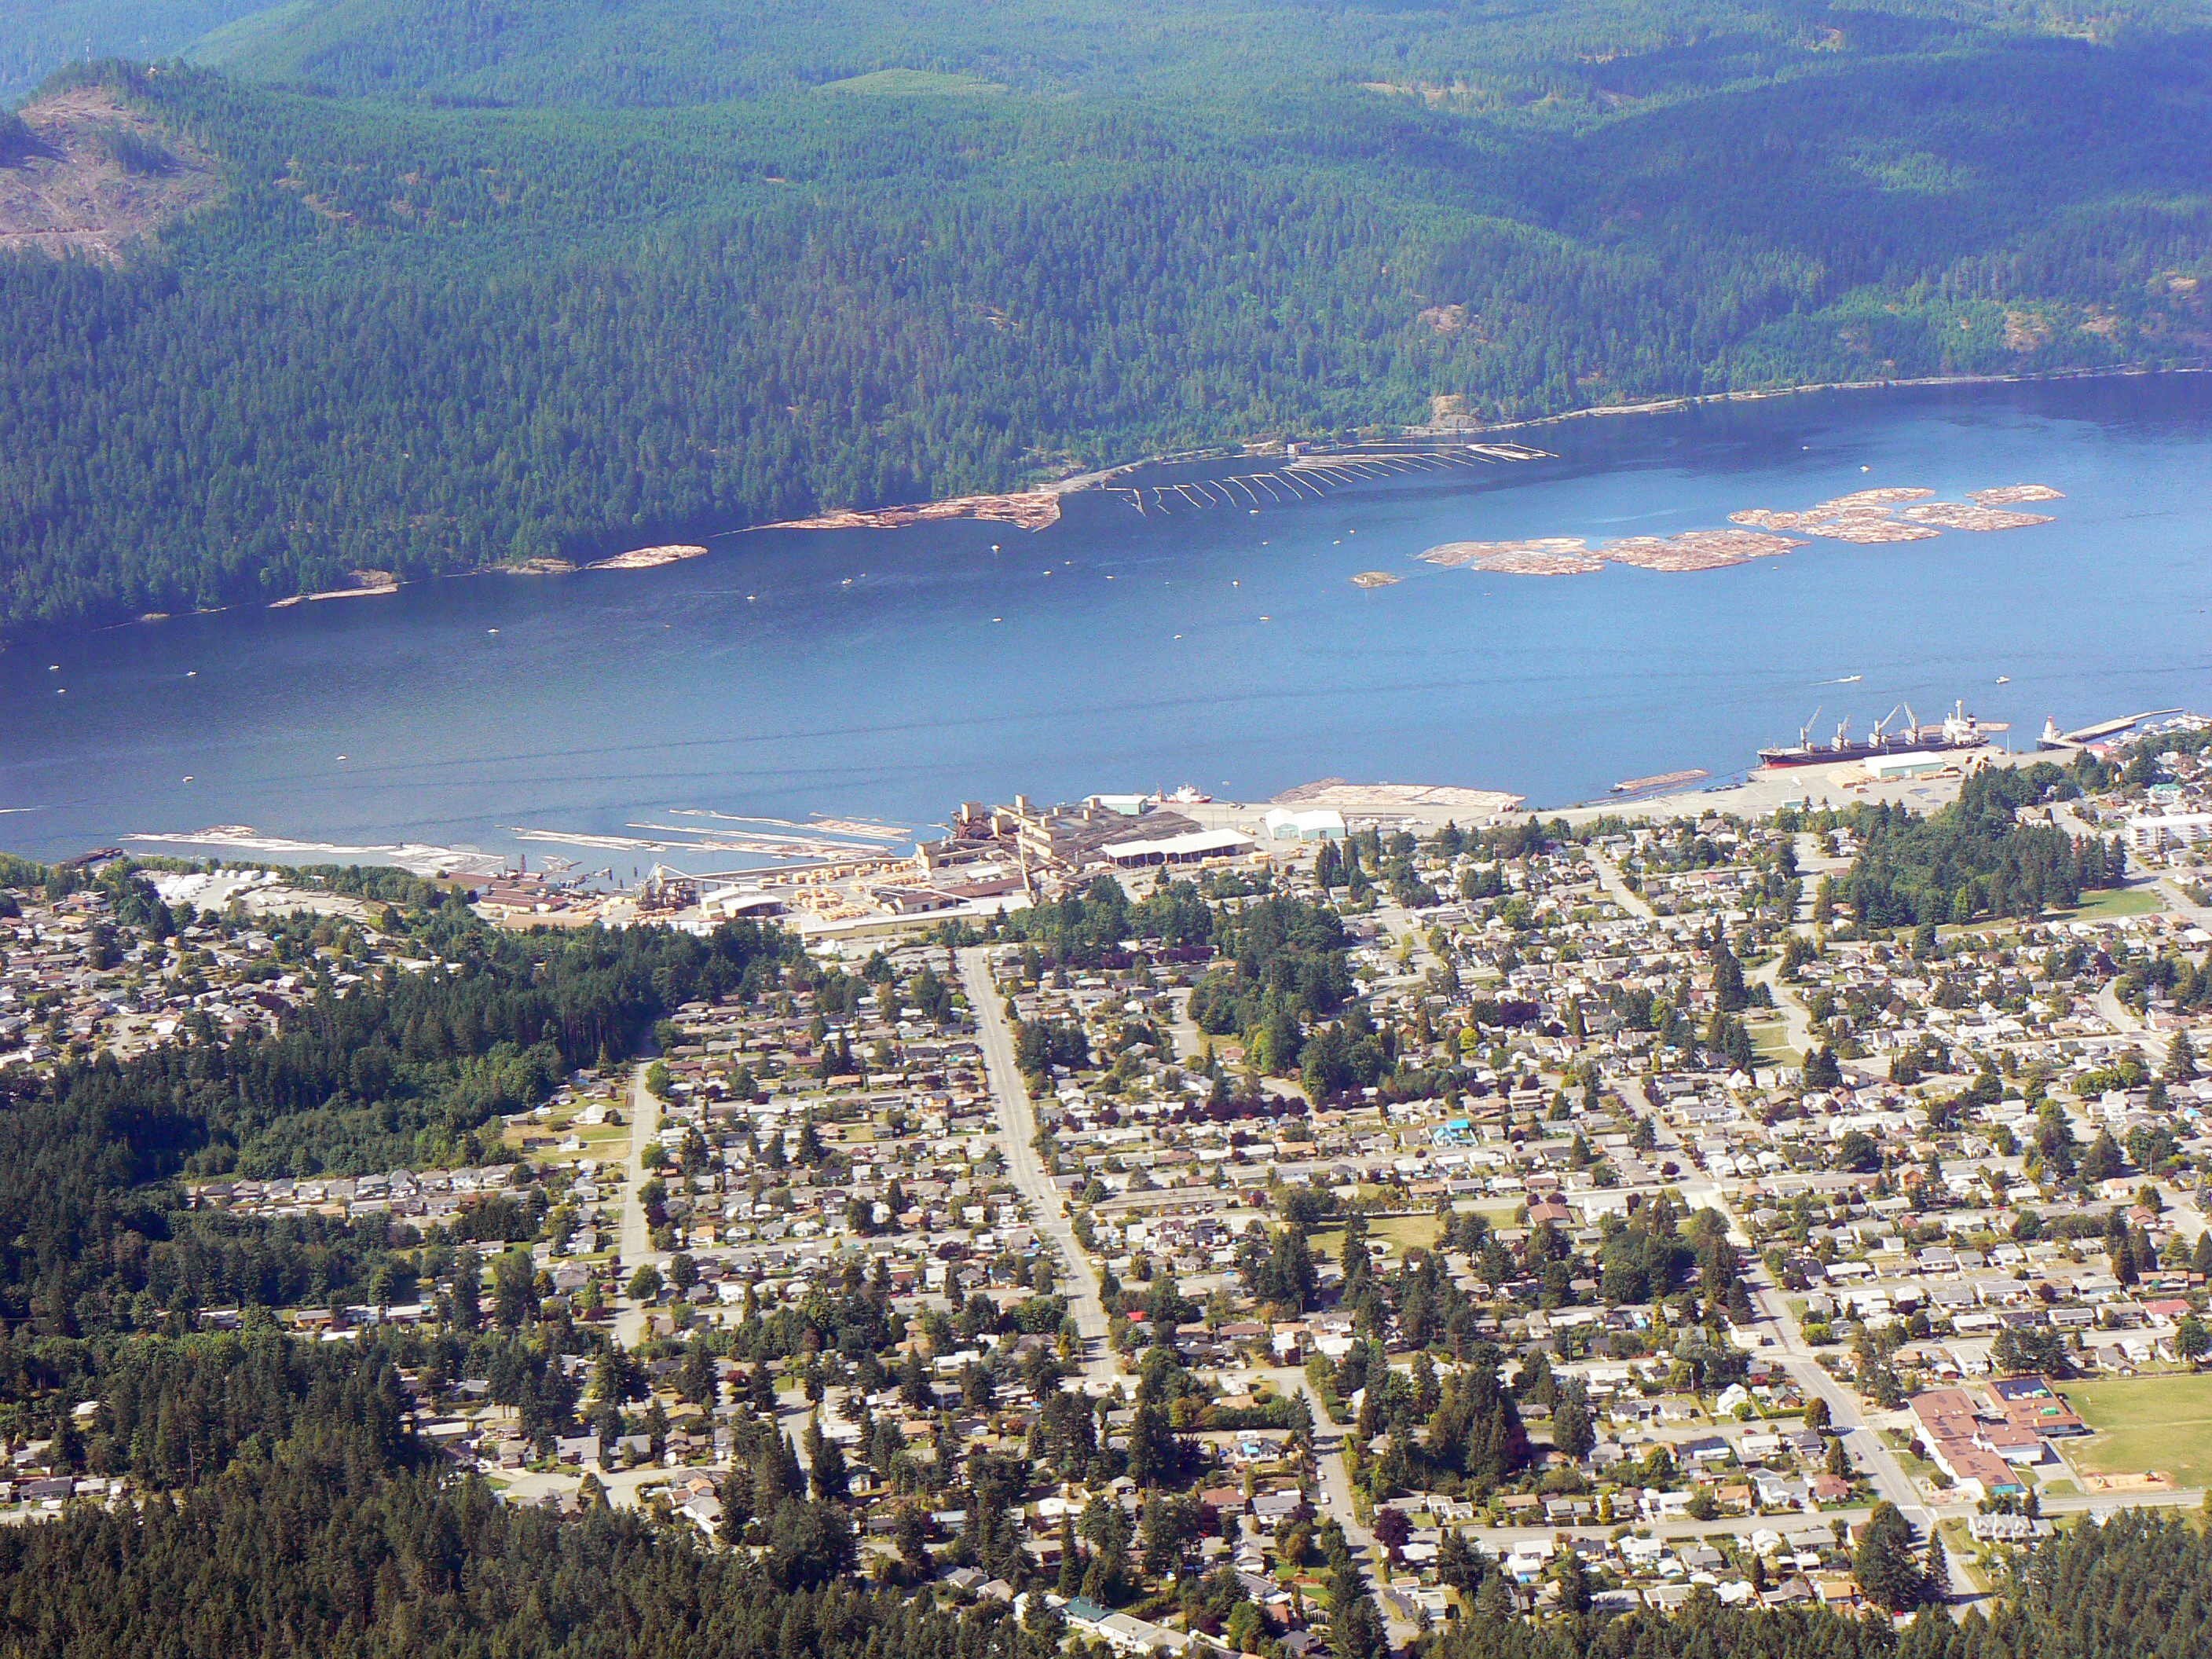 Aerial view of the south end of Port Alberni